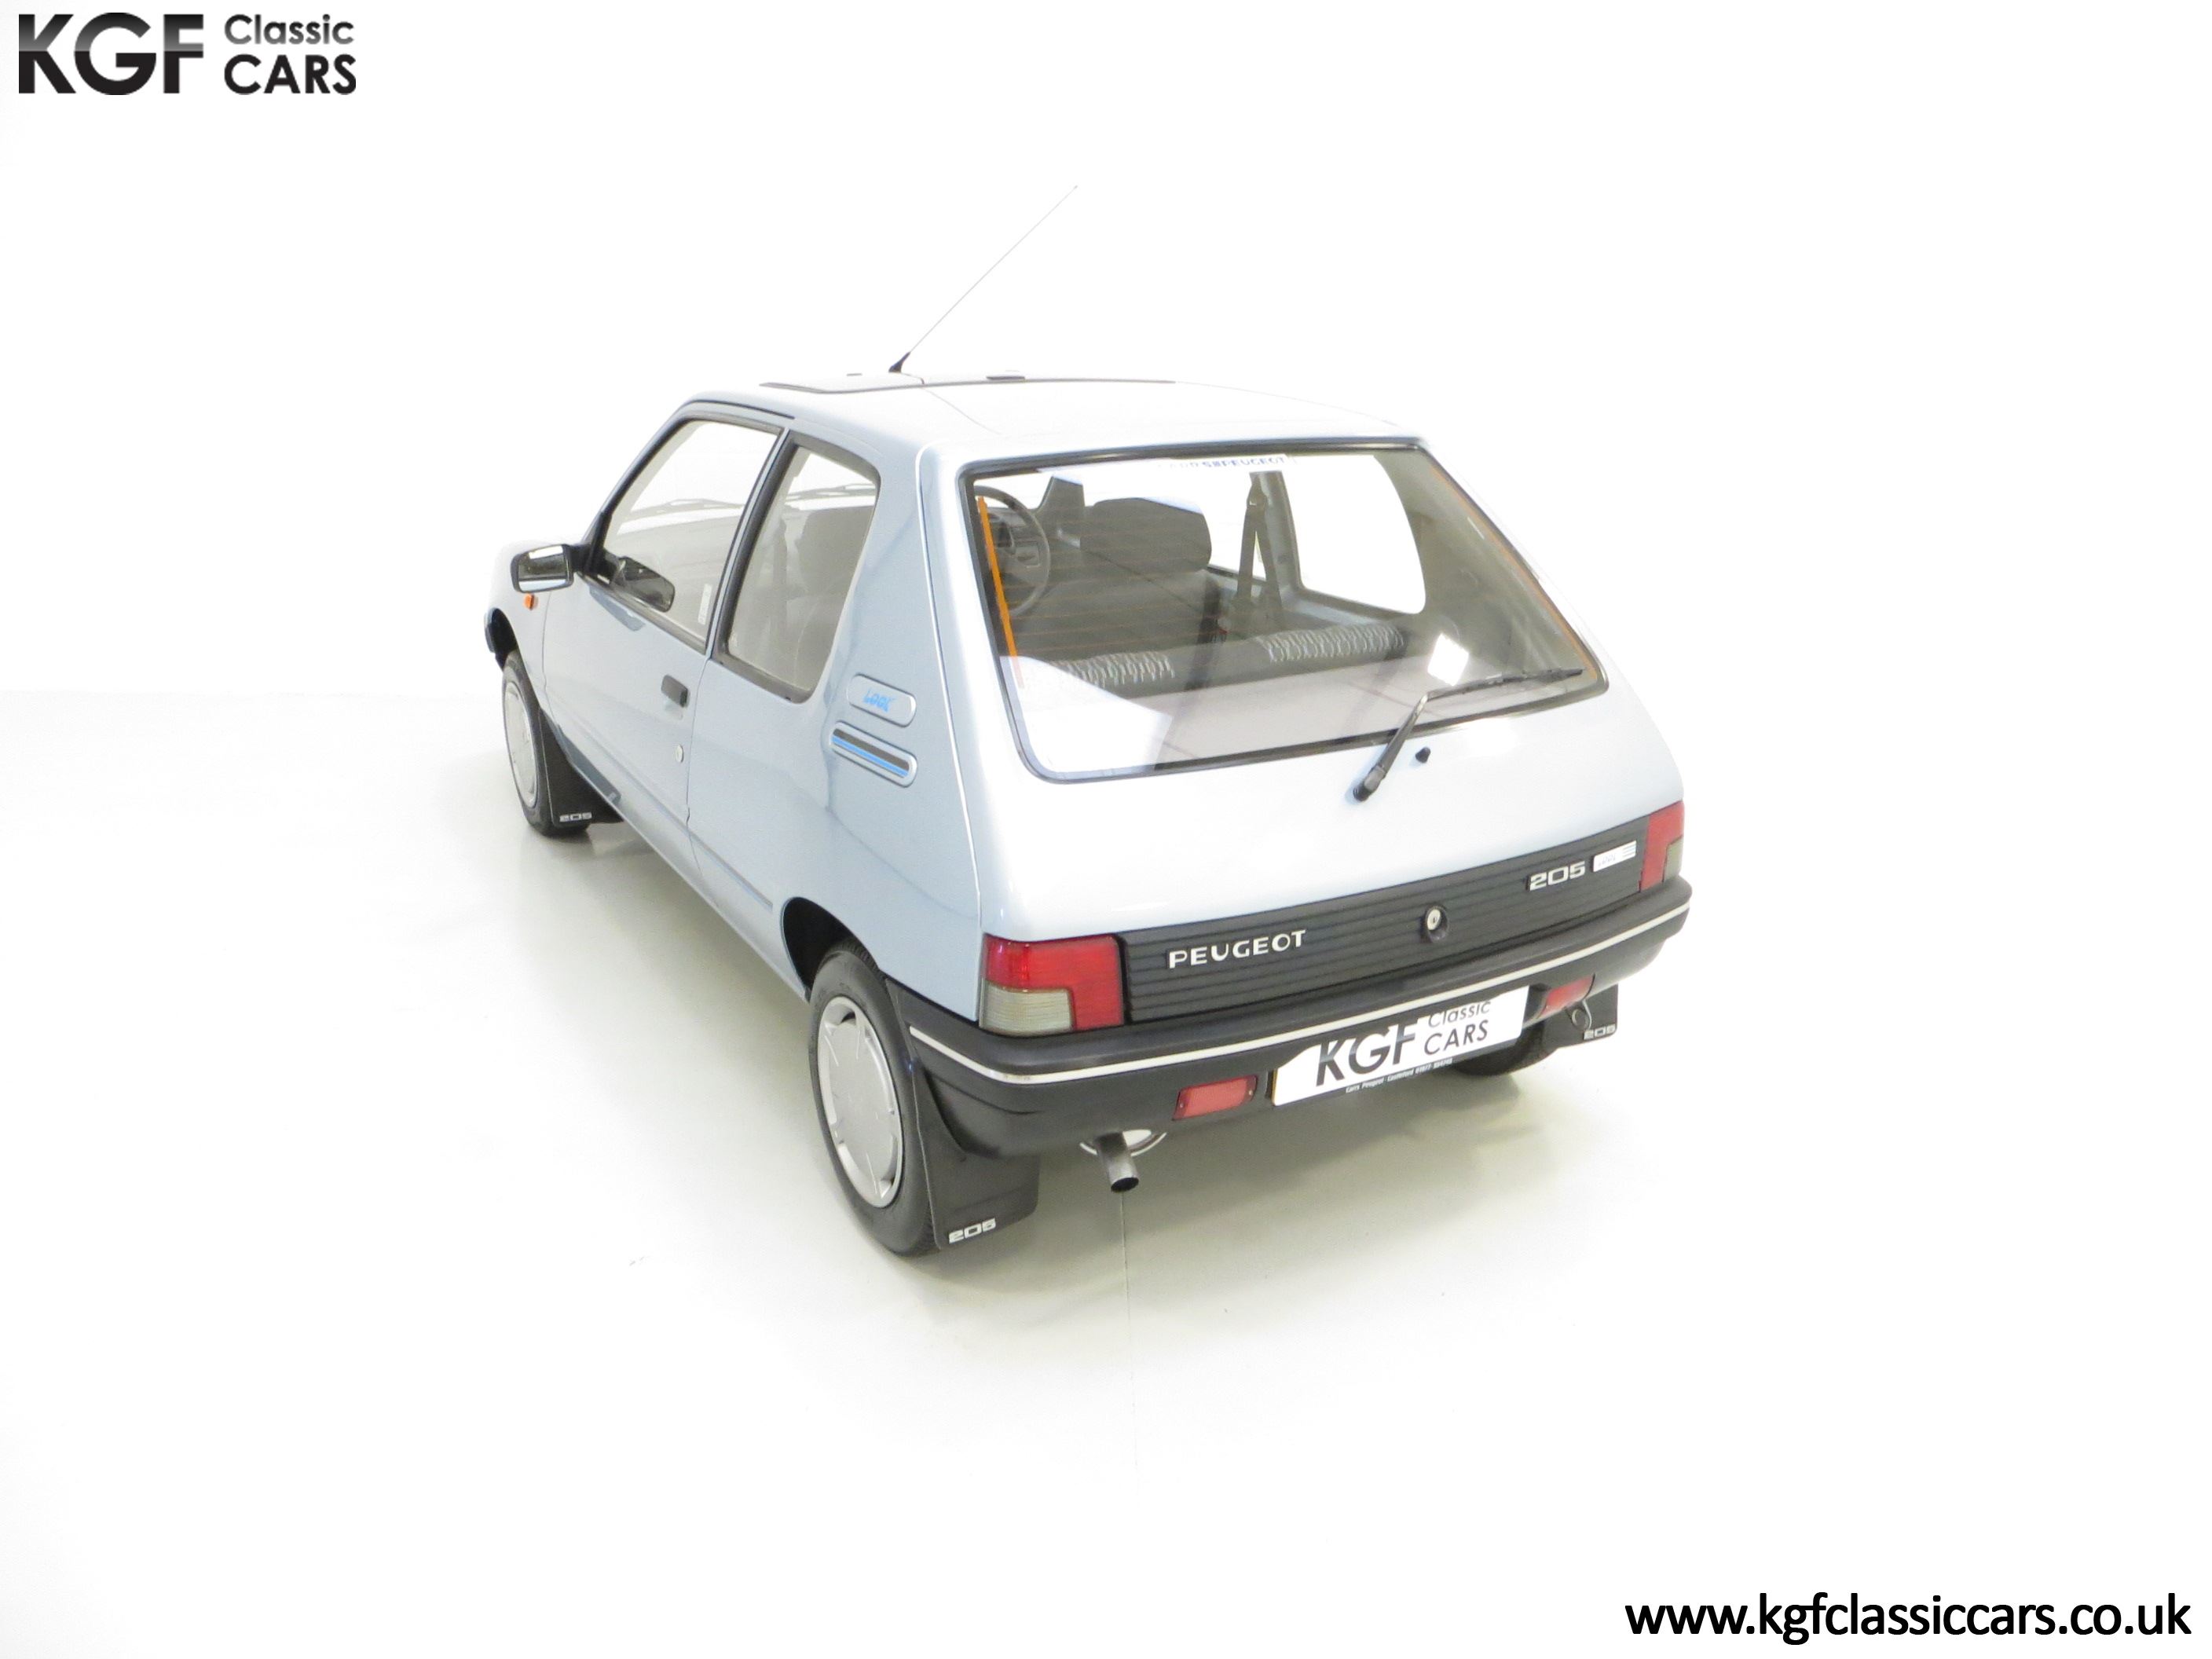 Peugeot 205 t6gwhumeovee2zblf9yjw